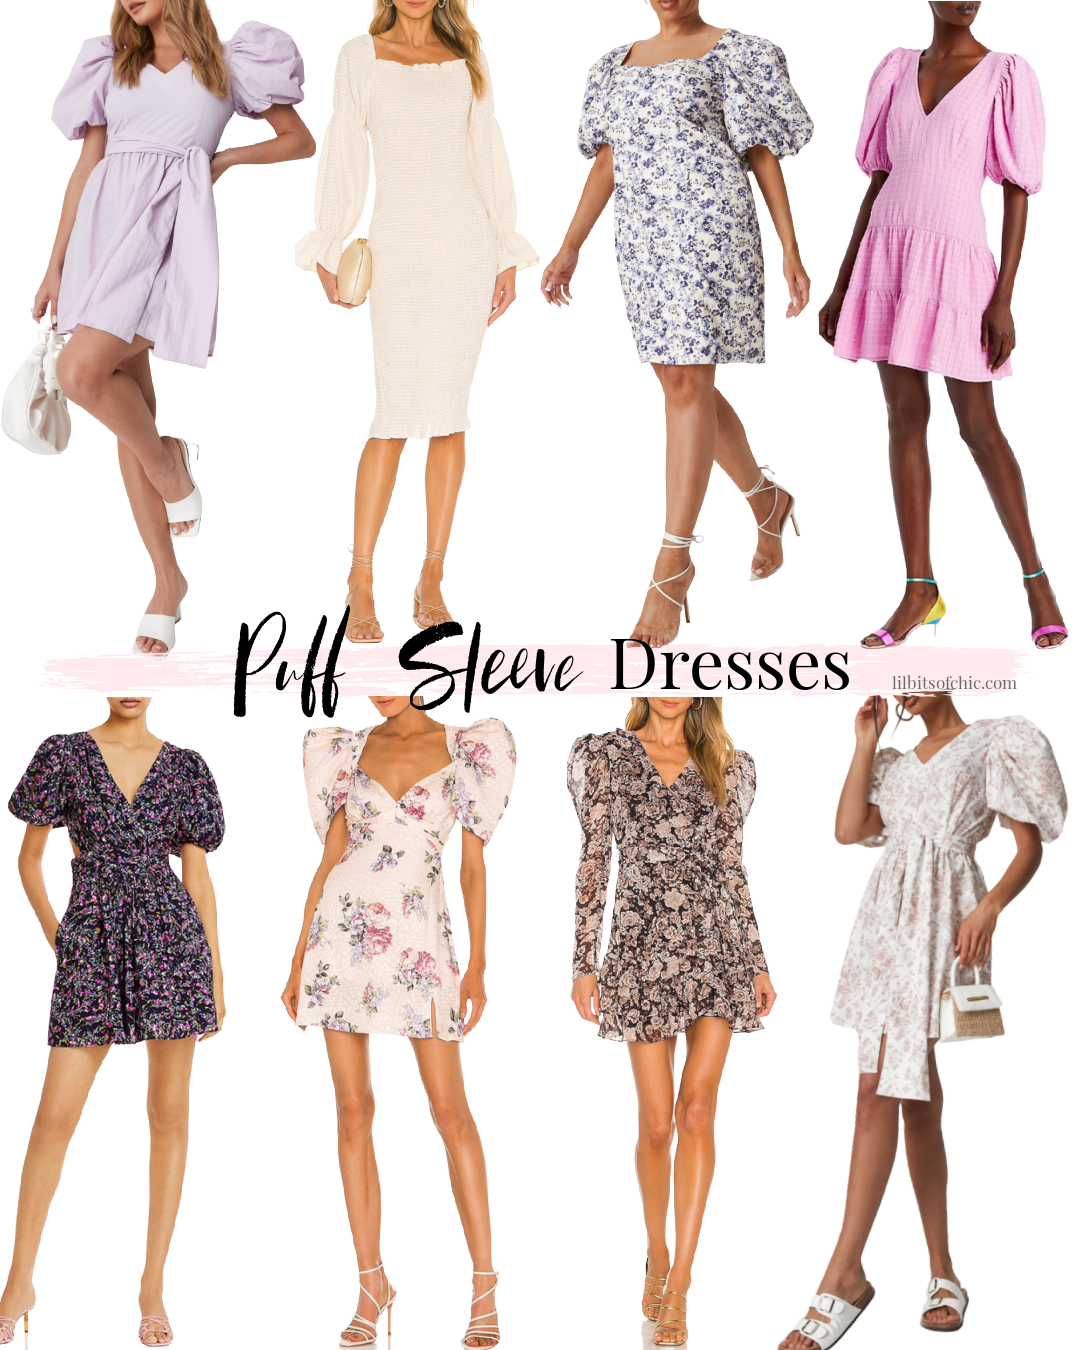 Puff Sleeve Dresses for your next event - Lil bits of Chic